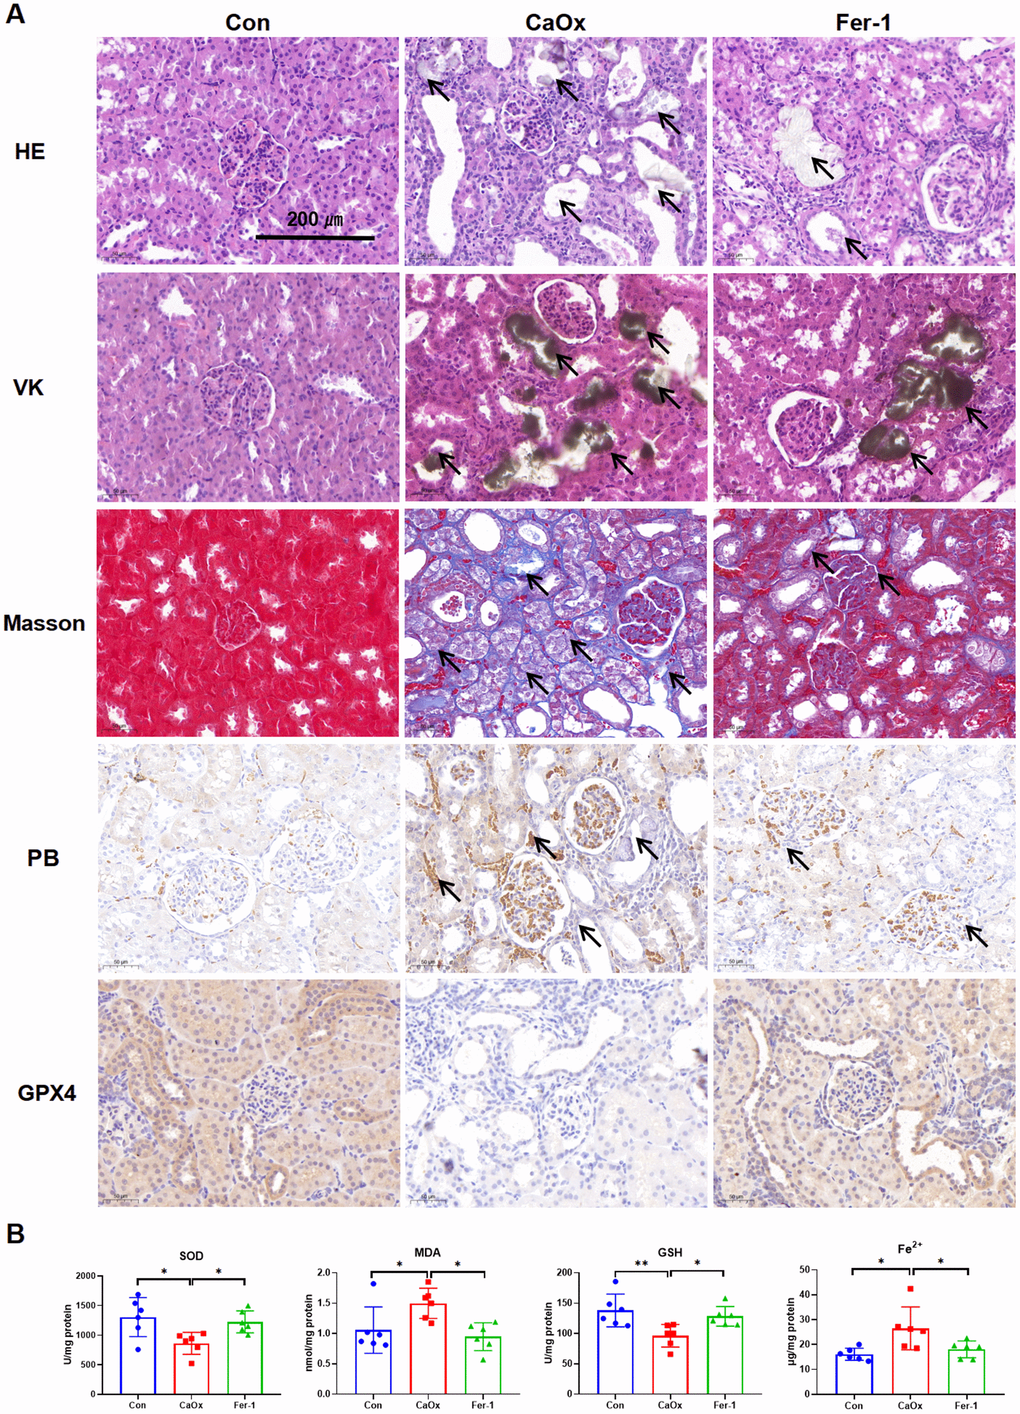 Fer-1 reduces CaOx crystal deposition and kidney injury in CaOx nephrolithiasis rat models. (A) Pathological sections including HE, VK, and Masson staining show the degree of kidney injury, crystal deposition, and kidney fibrosis; PB staining shows the Fe3+, while IHC staining shows GPX4 protein expression in different groups (magnification×20; scale bar, 200 μm). (B) SOD, MDA, GSH, and Fe2+ levels are detected in different groups (mean ± SD, n = 6, *P P 